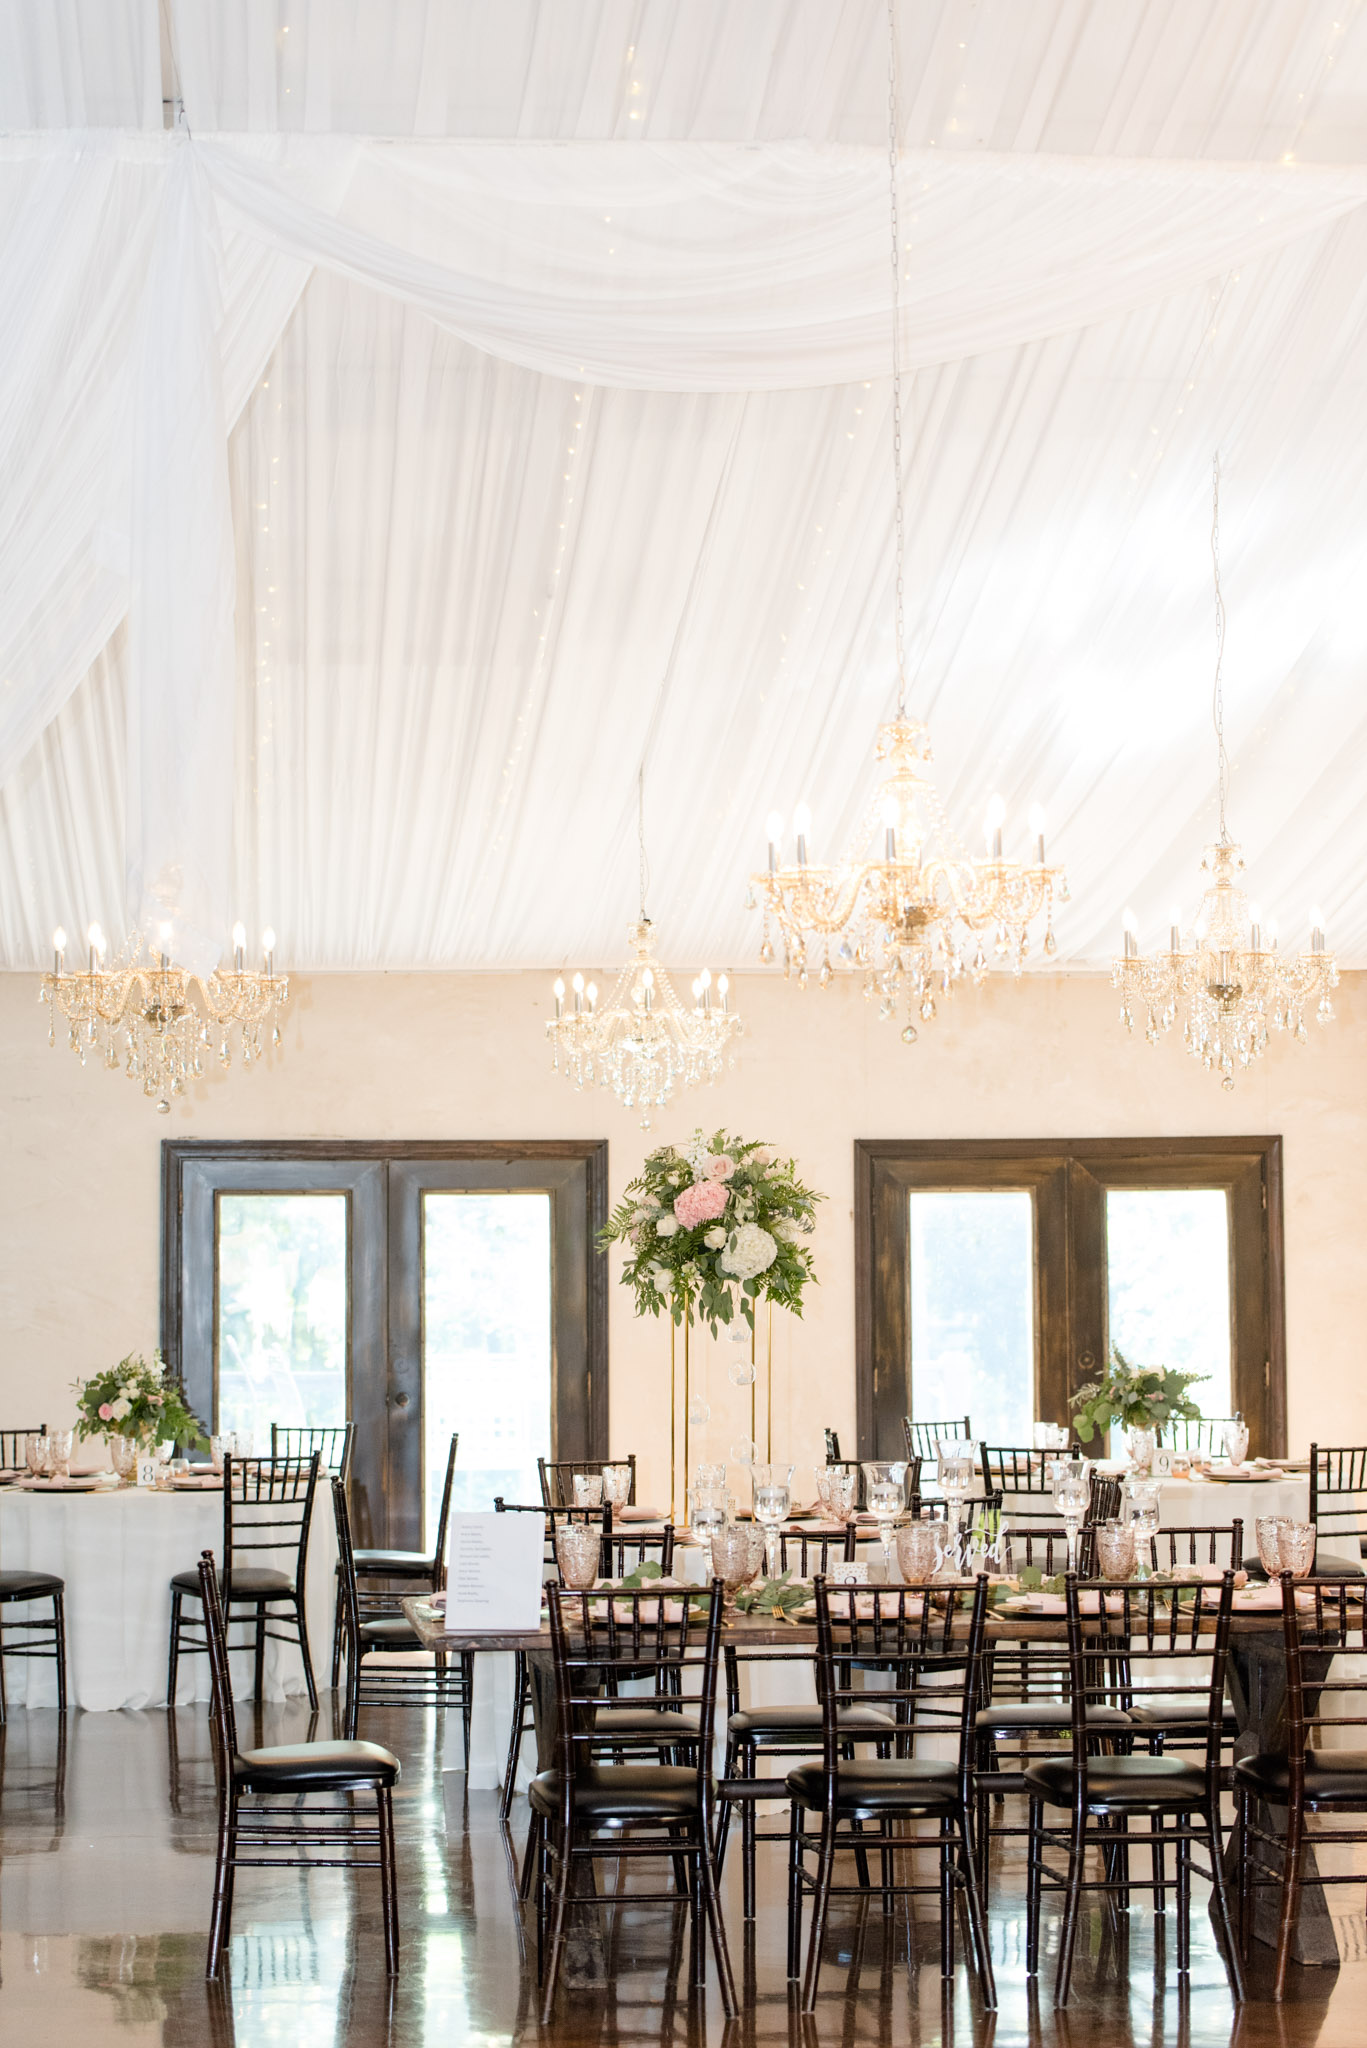 Reception seating with chandeliers